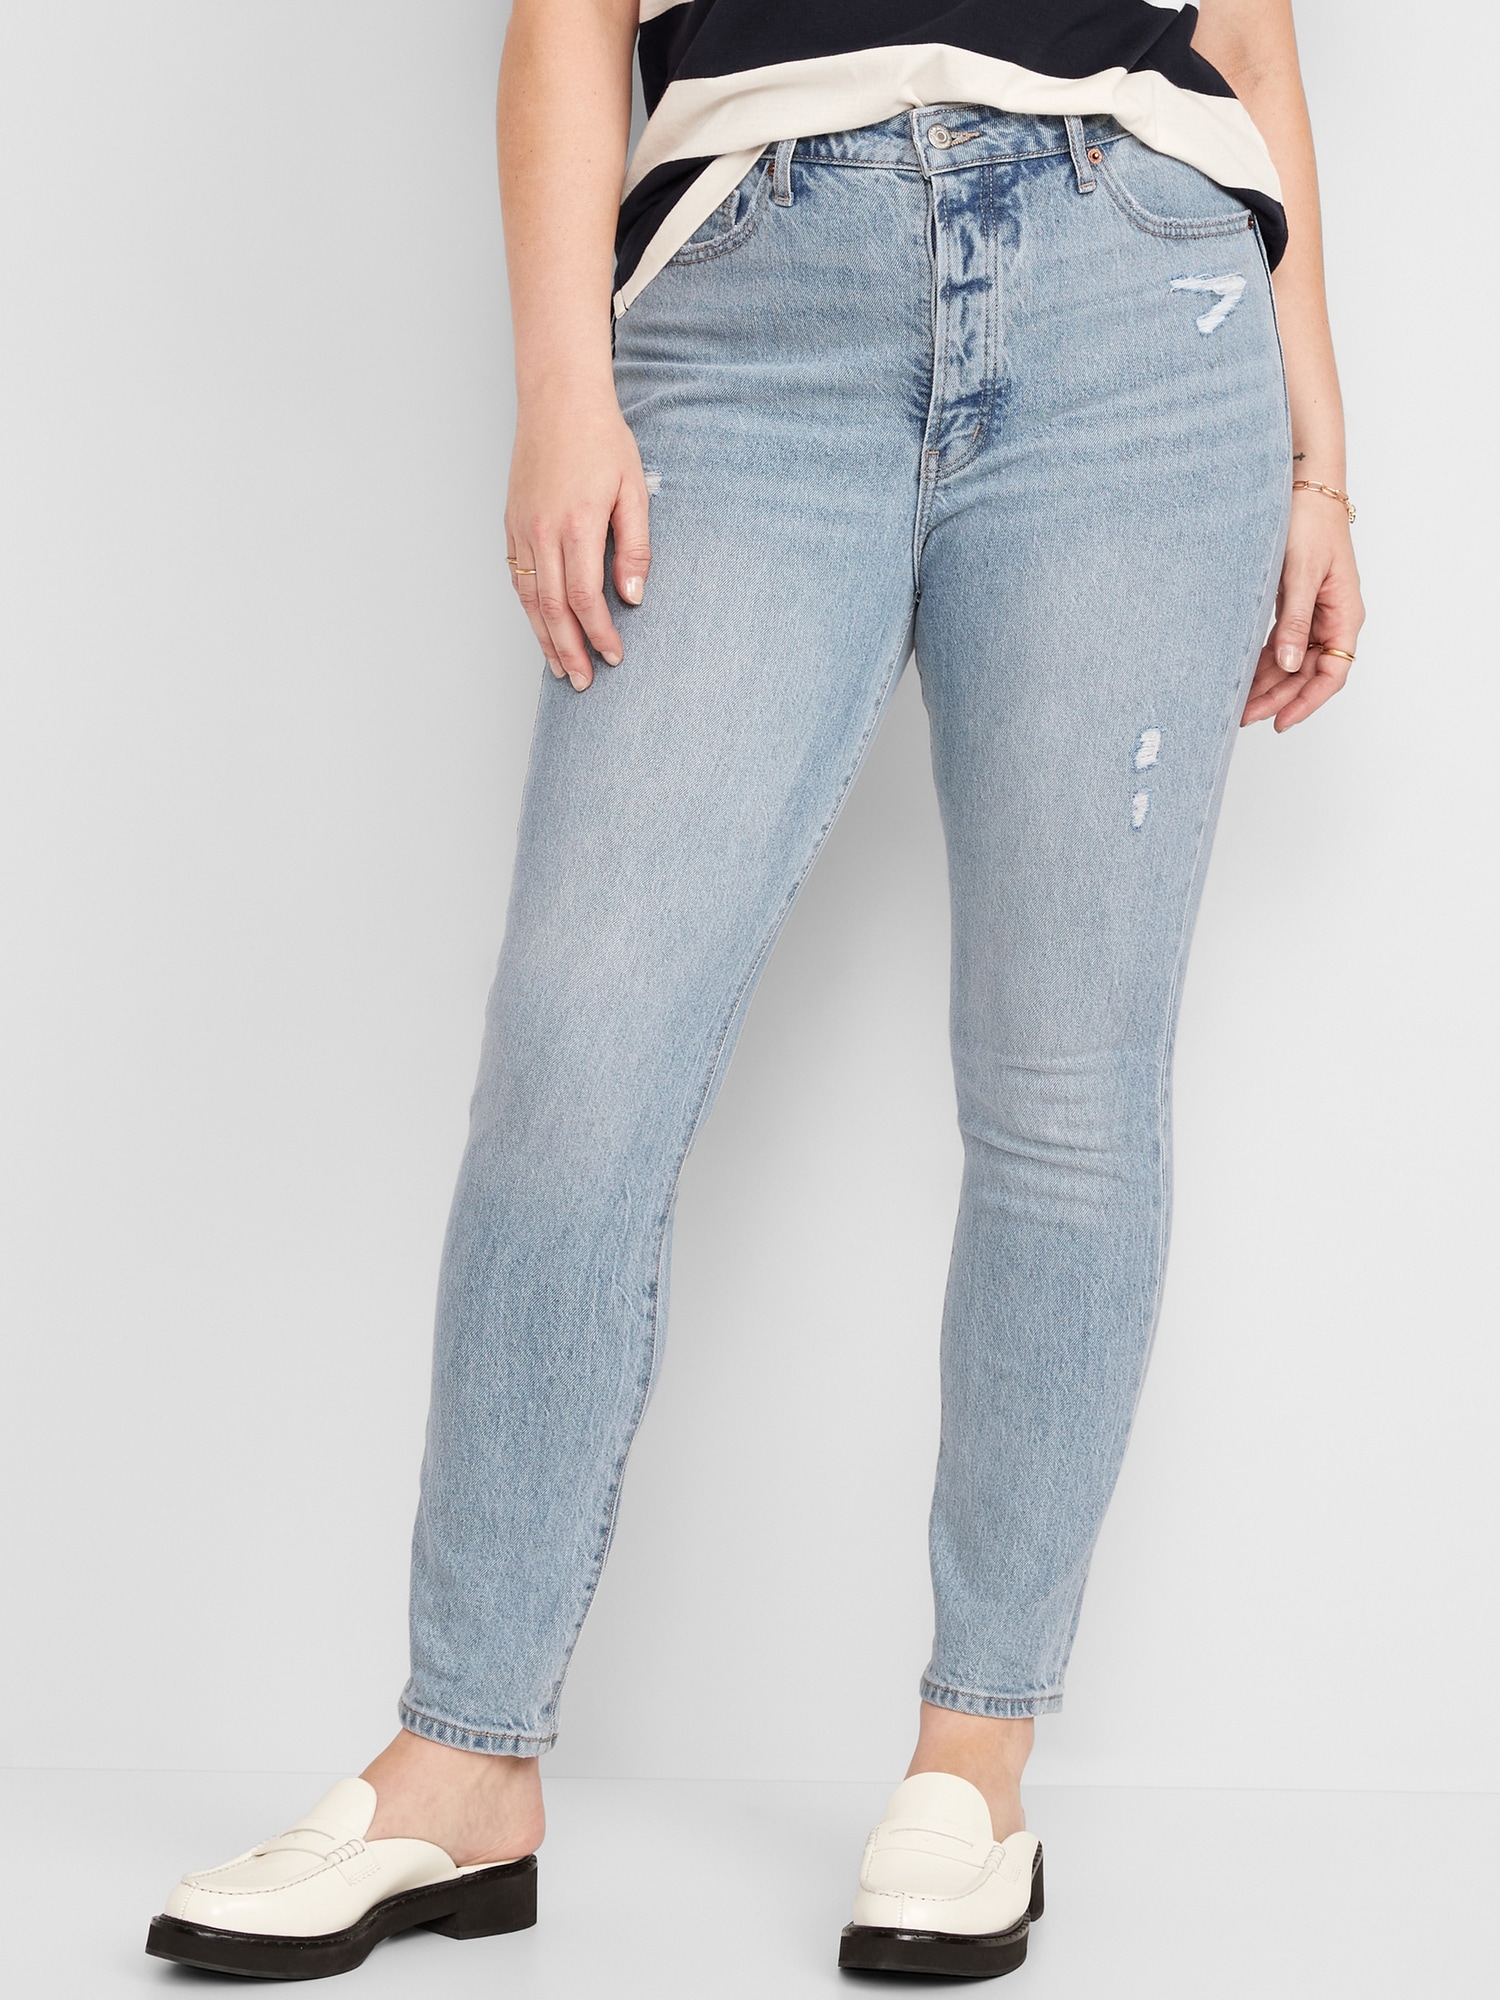 Extra High-Waisted Hidden Button-Fly Pop Icon Distressed Skinny Jeans ...